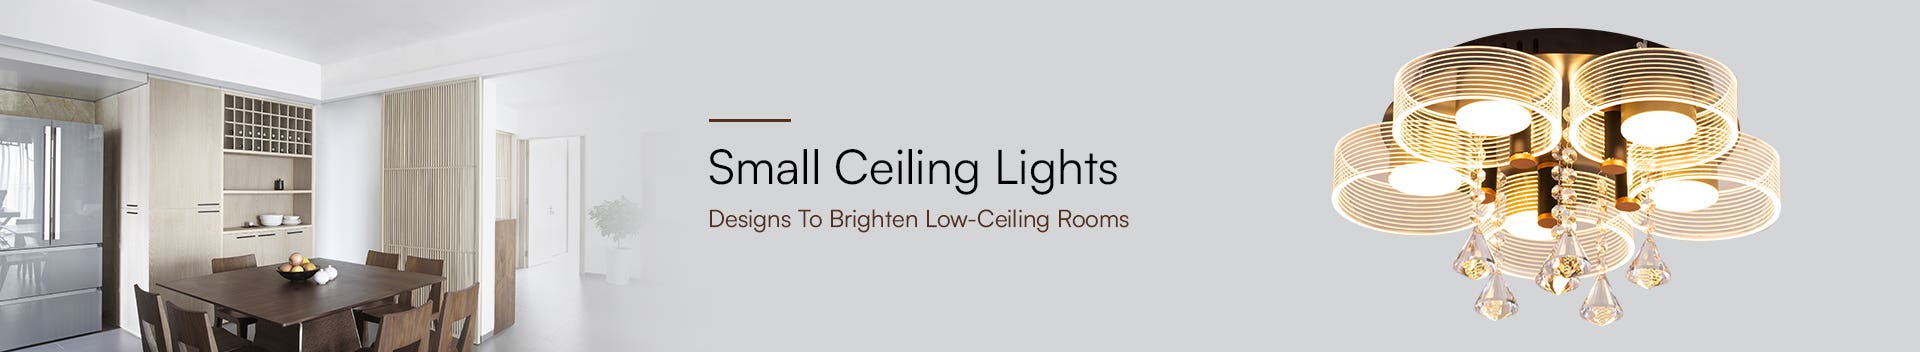 Small Ceiling Lights